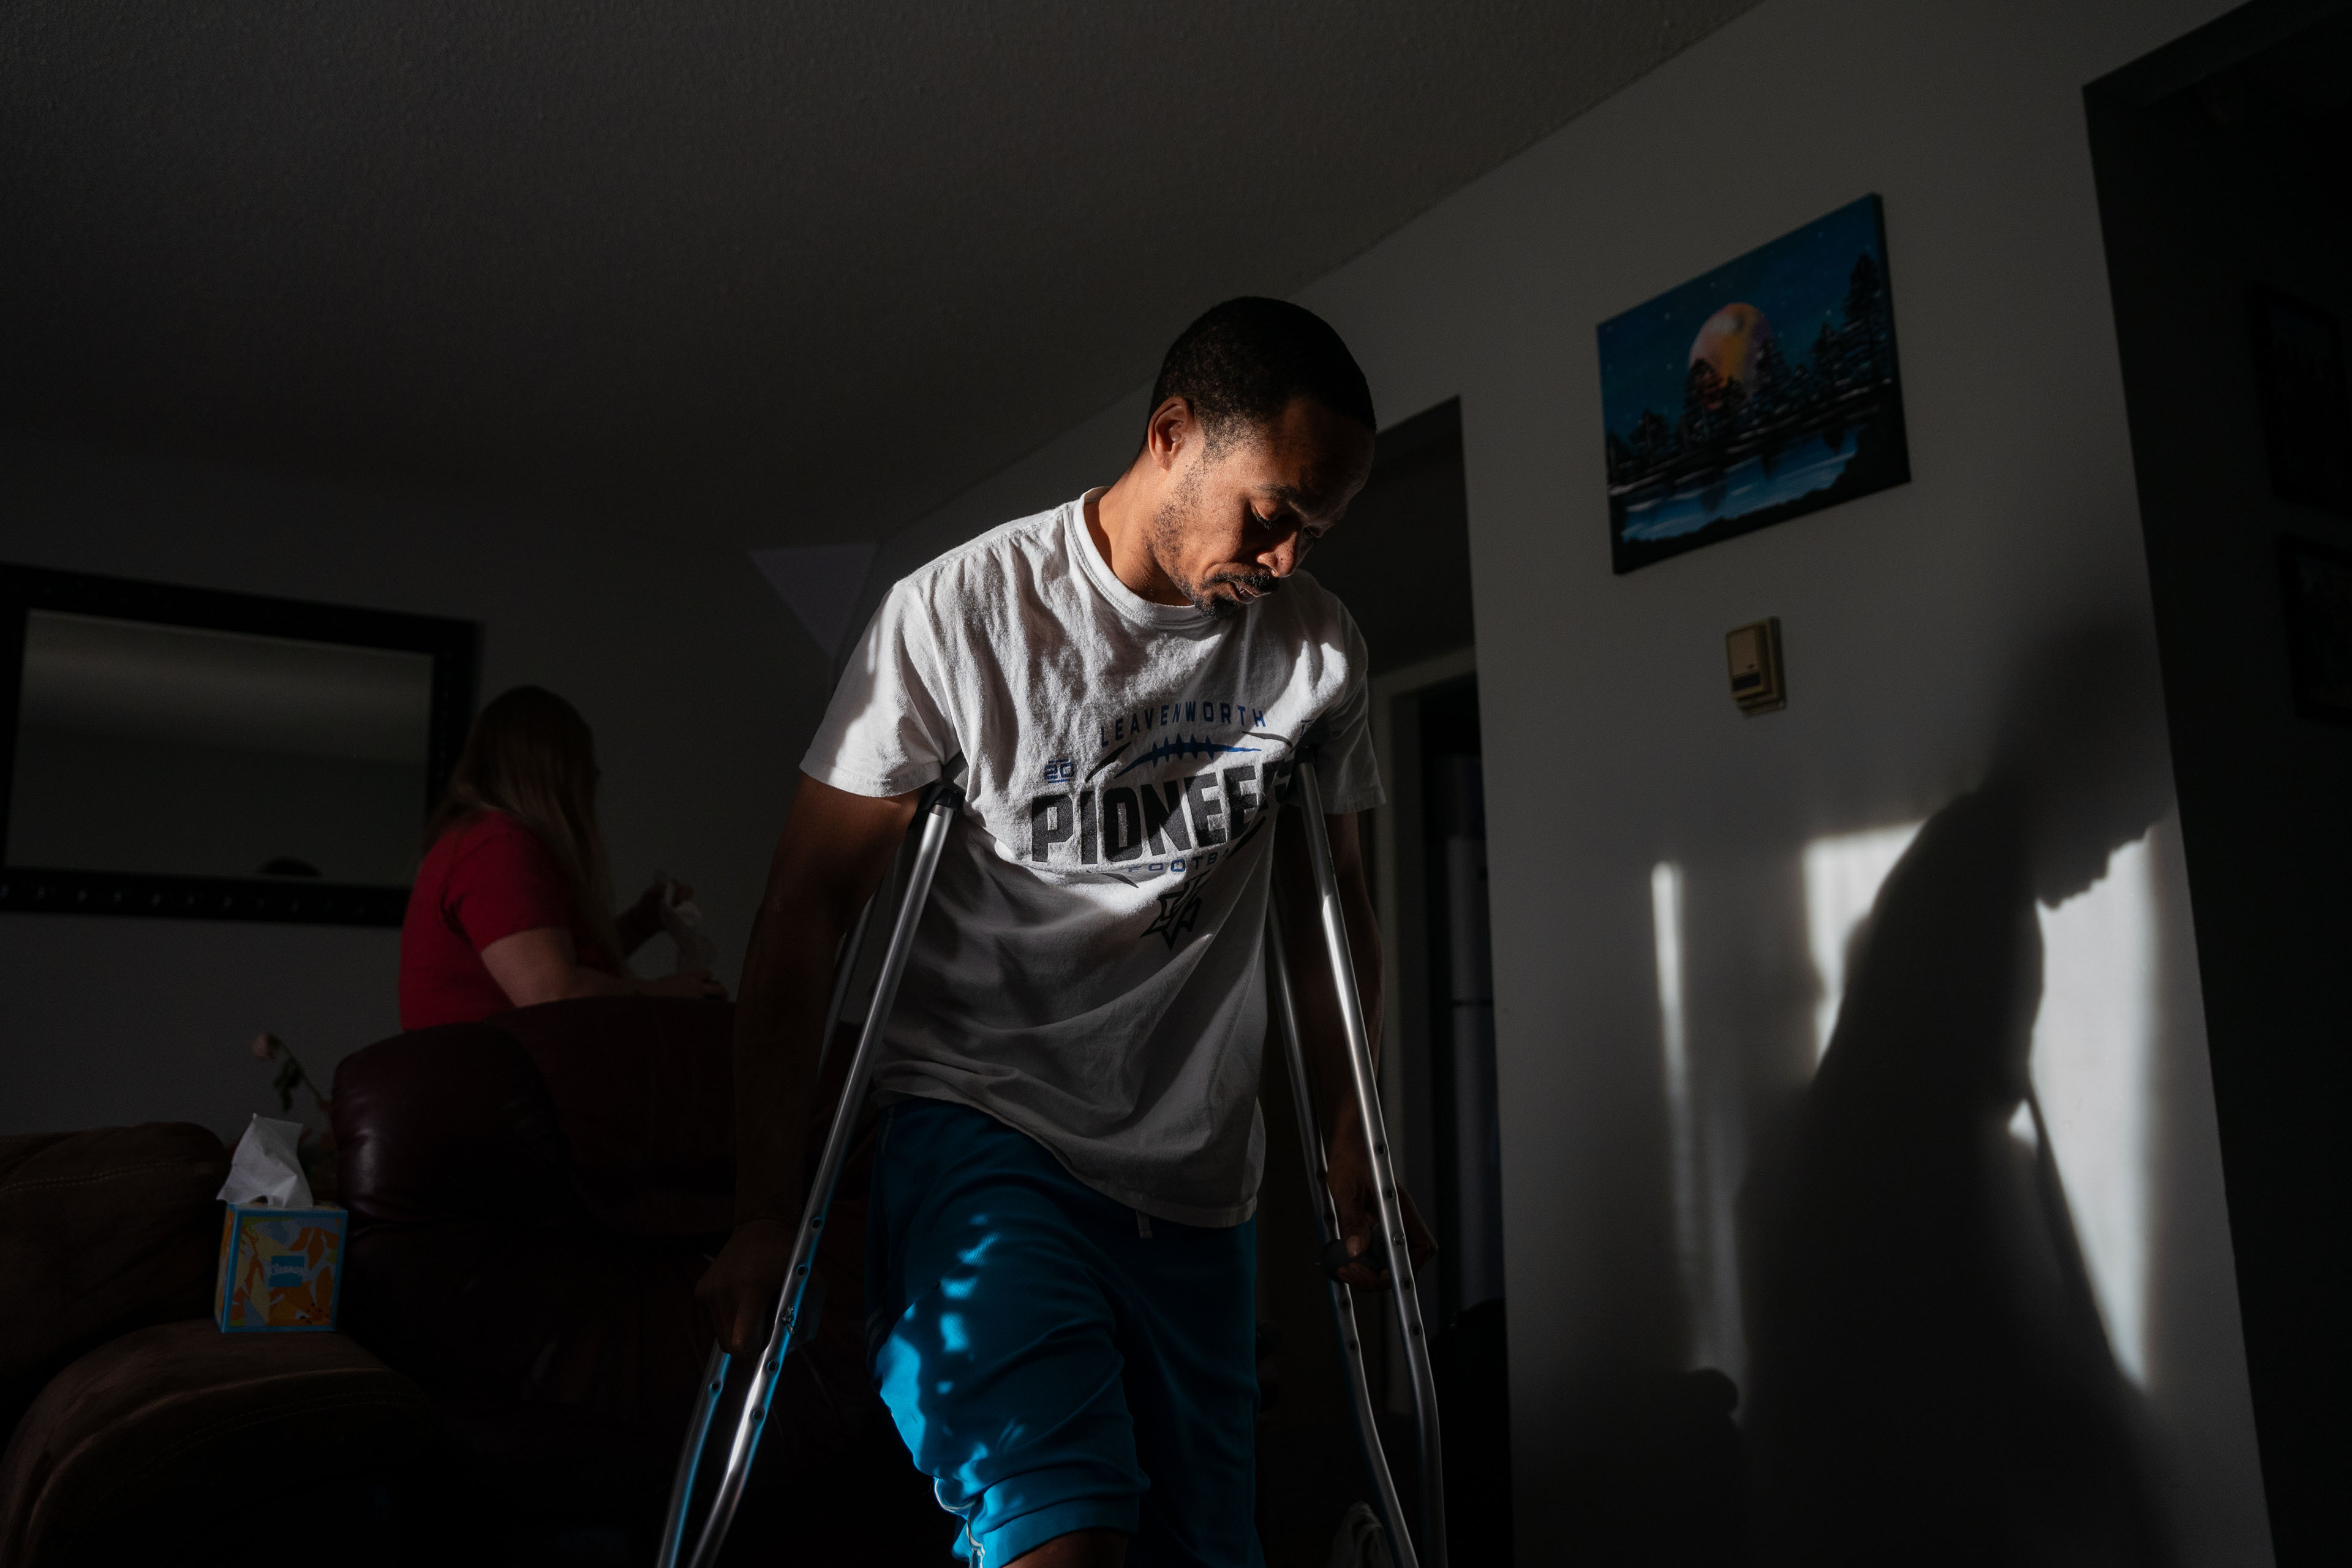 Jacob Gooch Sr. is standing on crutches in a room in his home. The room is dark, but he stands in a beam of light coming in through a window.